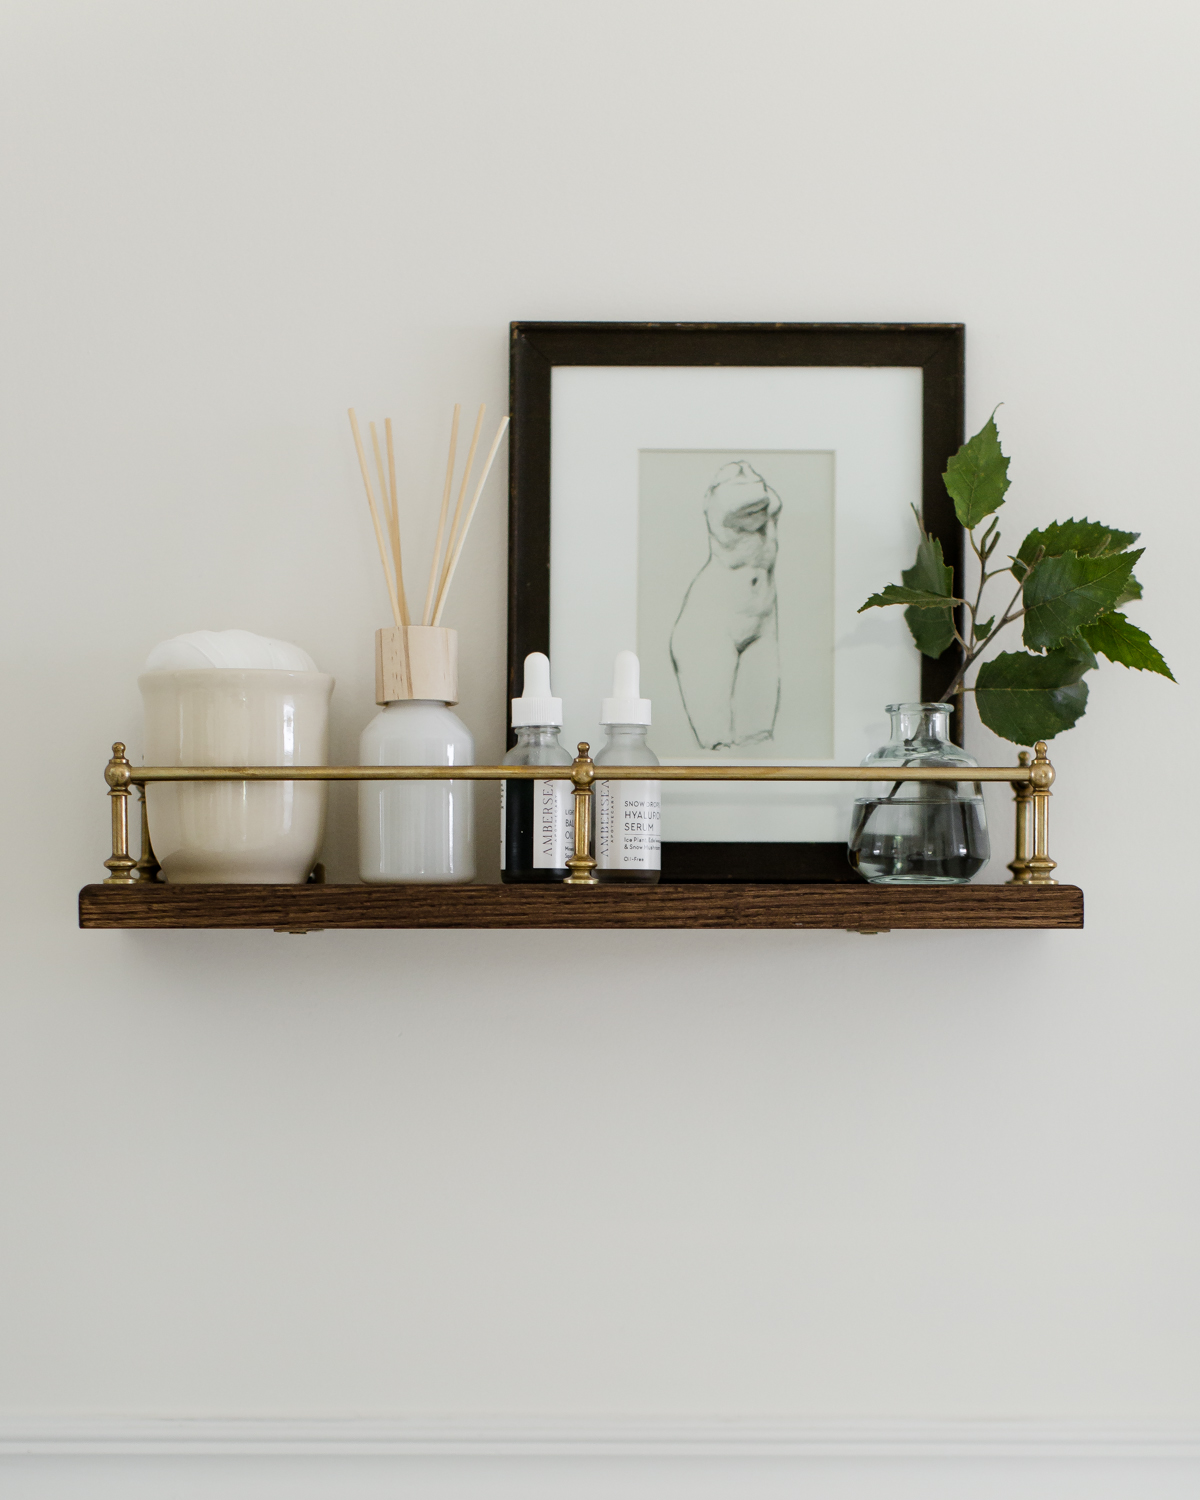 How To Decorate Bathroom Shelves - Through My Front Porch